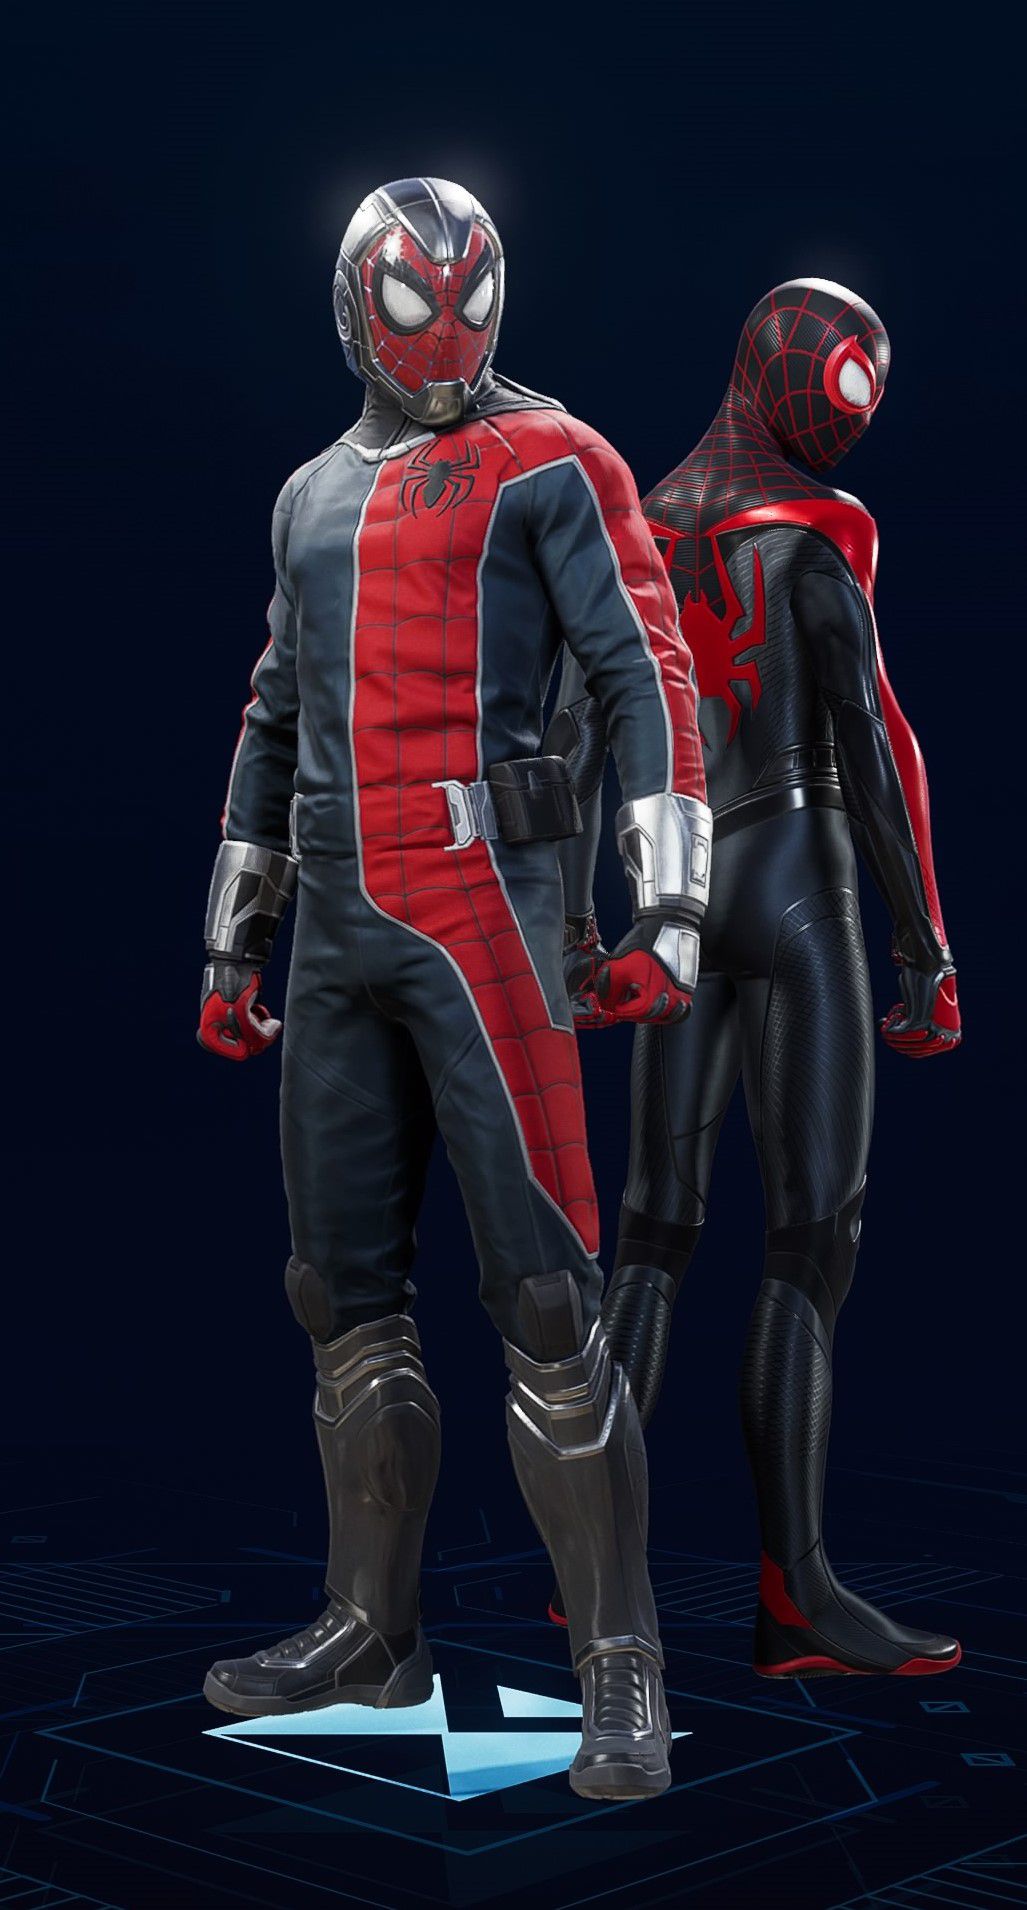 Peter Parker stands in his Life Story Suit in the suit selection screen of Spider-Man 2.